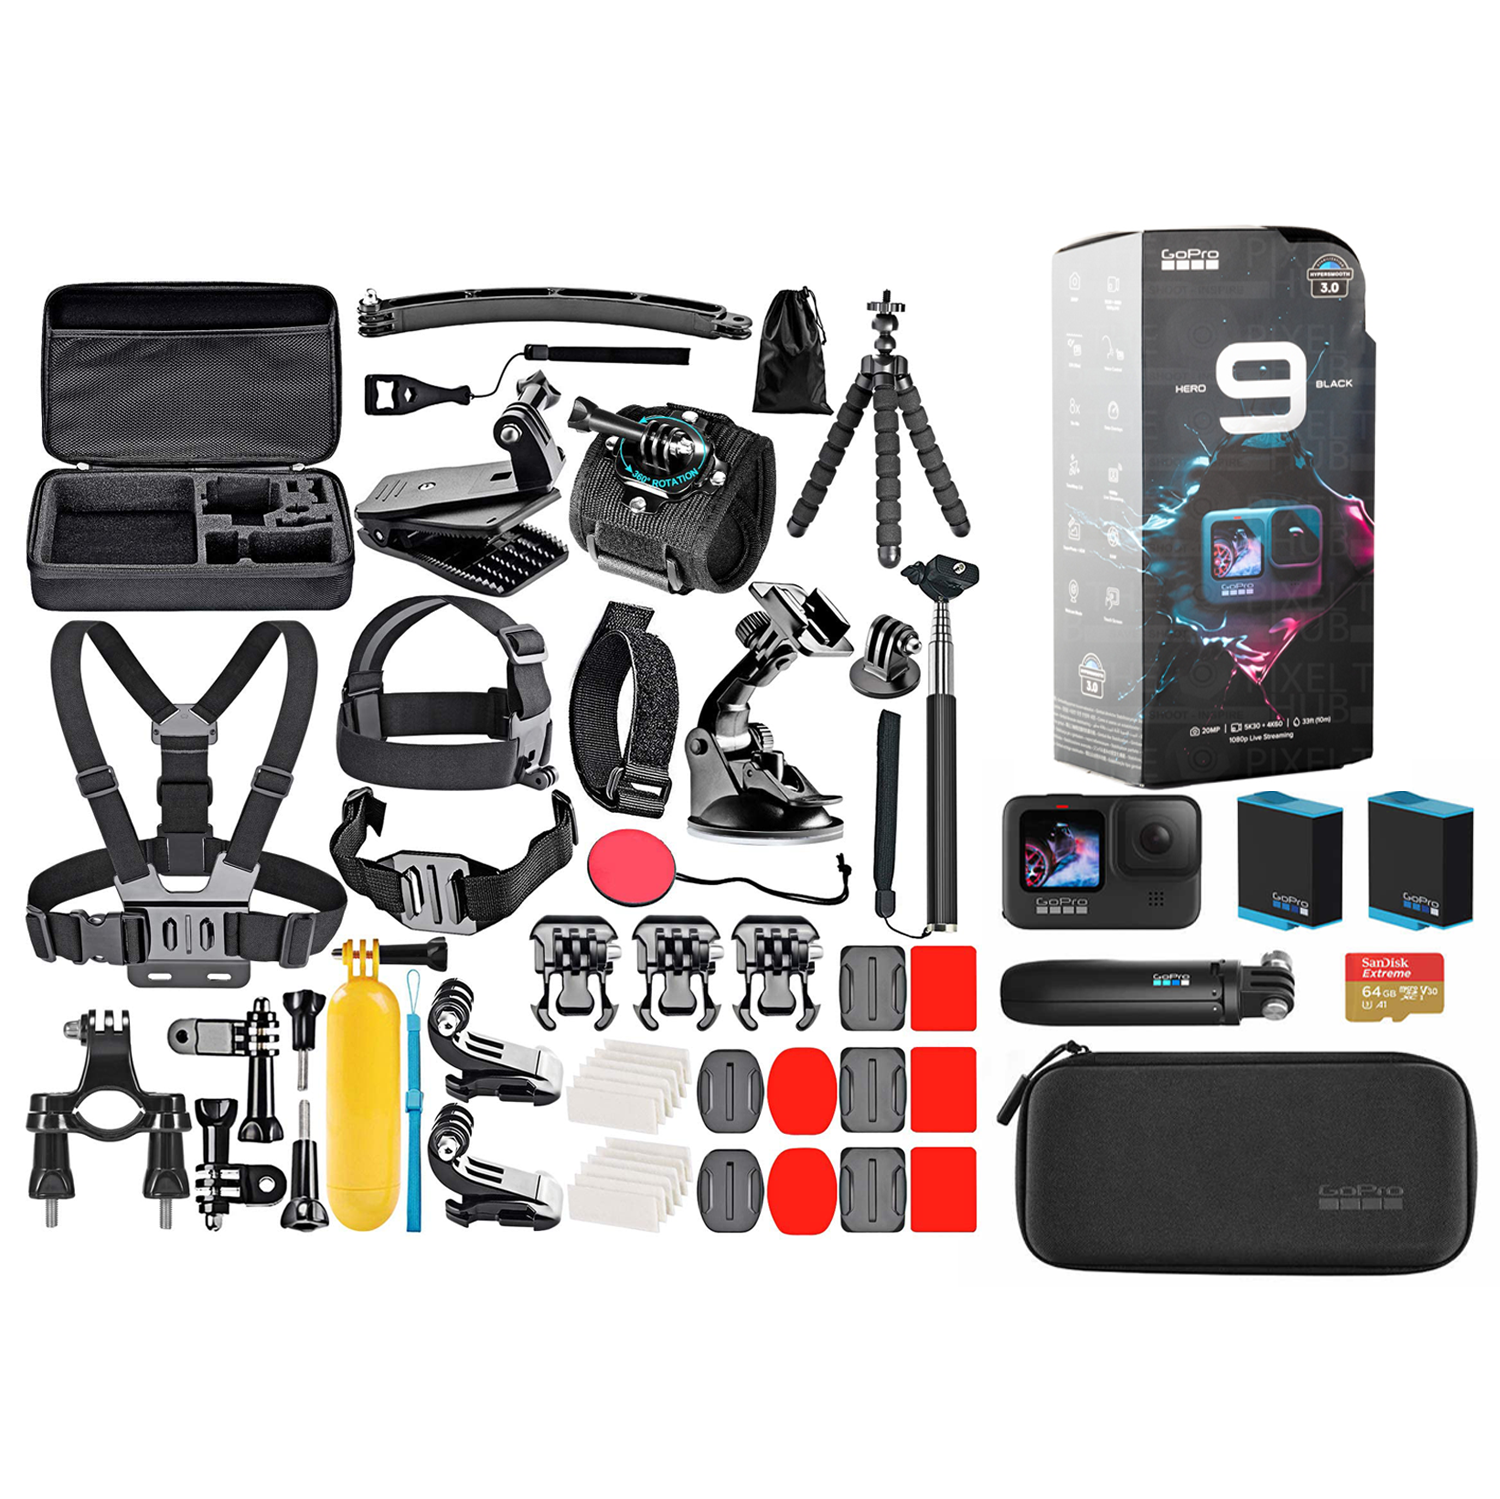 GoPro HERO9 Black MEGA Bundle - GoPro HERO 9 Black +2 Spare Battery + The Handler Tripod + Compact Case + 64 GB MicroSD Card + Travel Case and +50 Action Camera Accessory